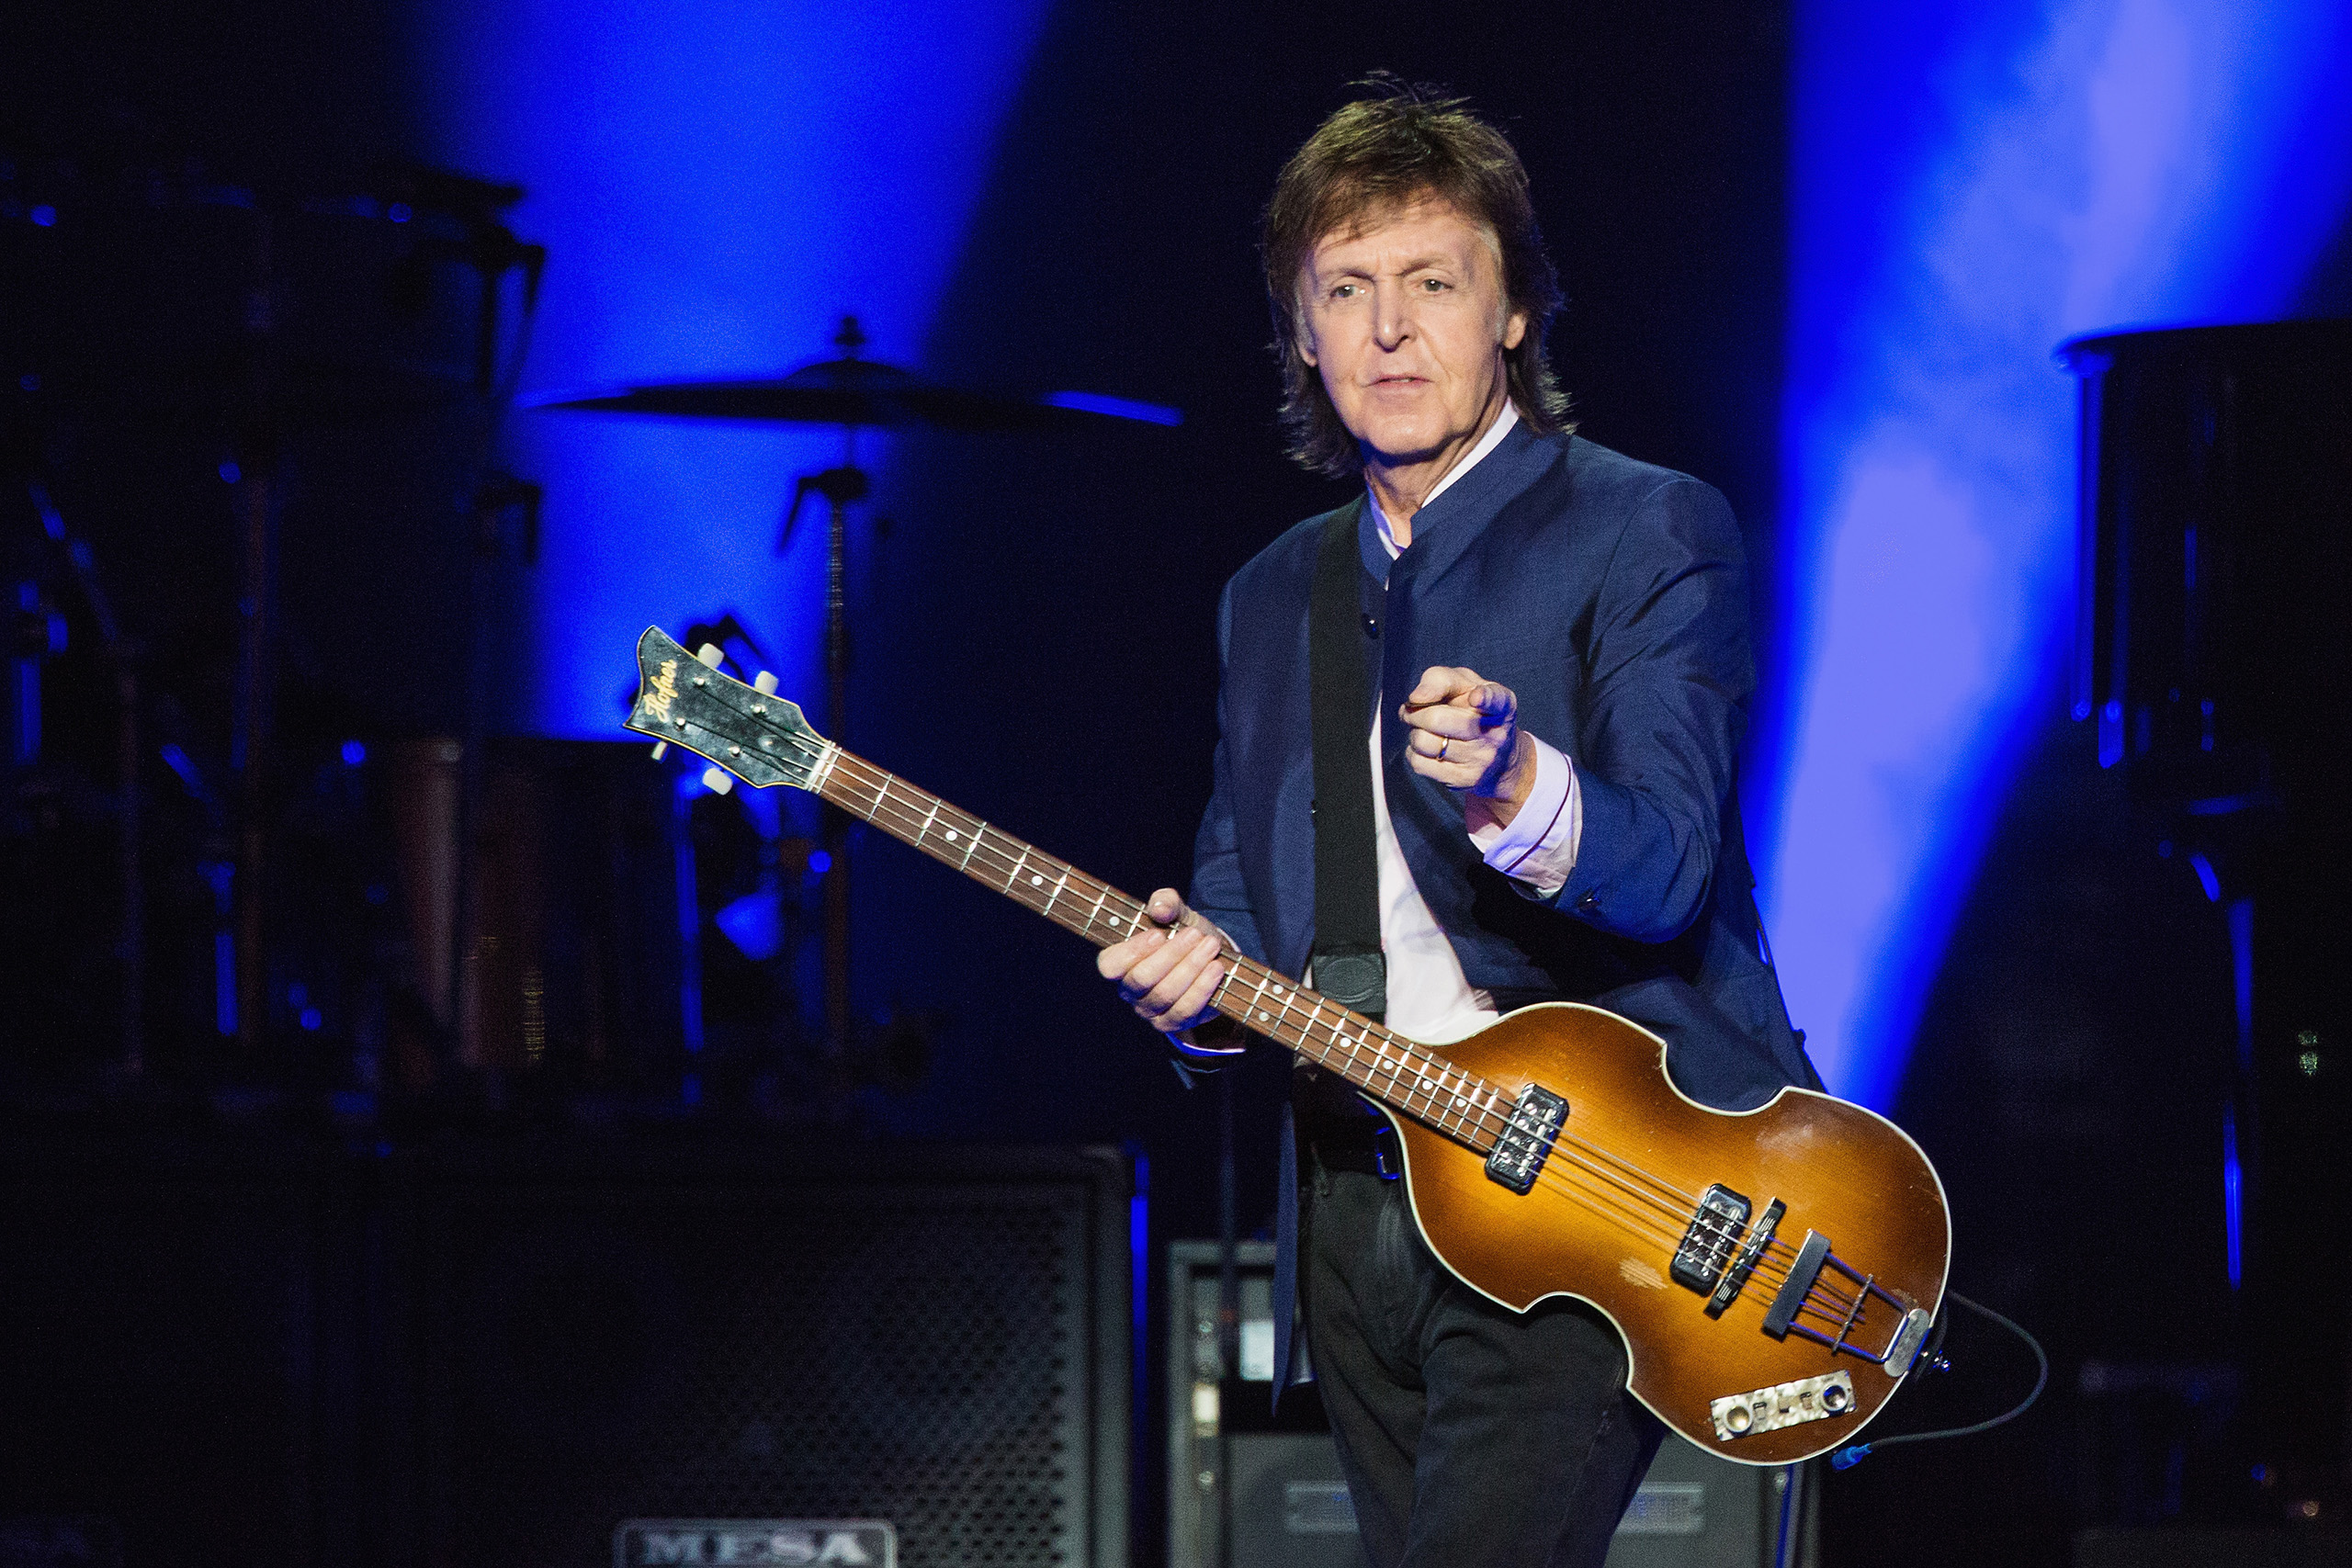 Paul McCartney performs on stage during the 'One on One' tour in Seattle, Washington, April 17, 2016. (Mat Hayward—Getty Images)